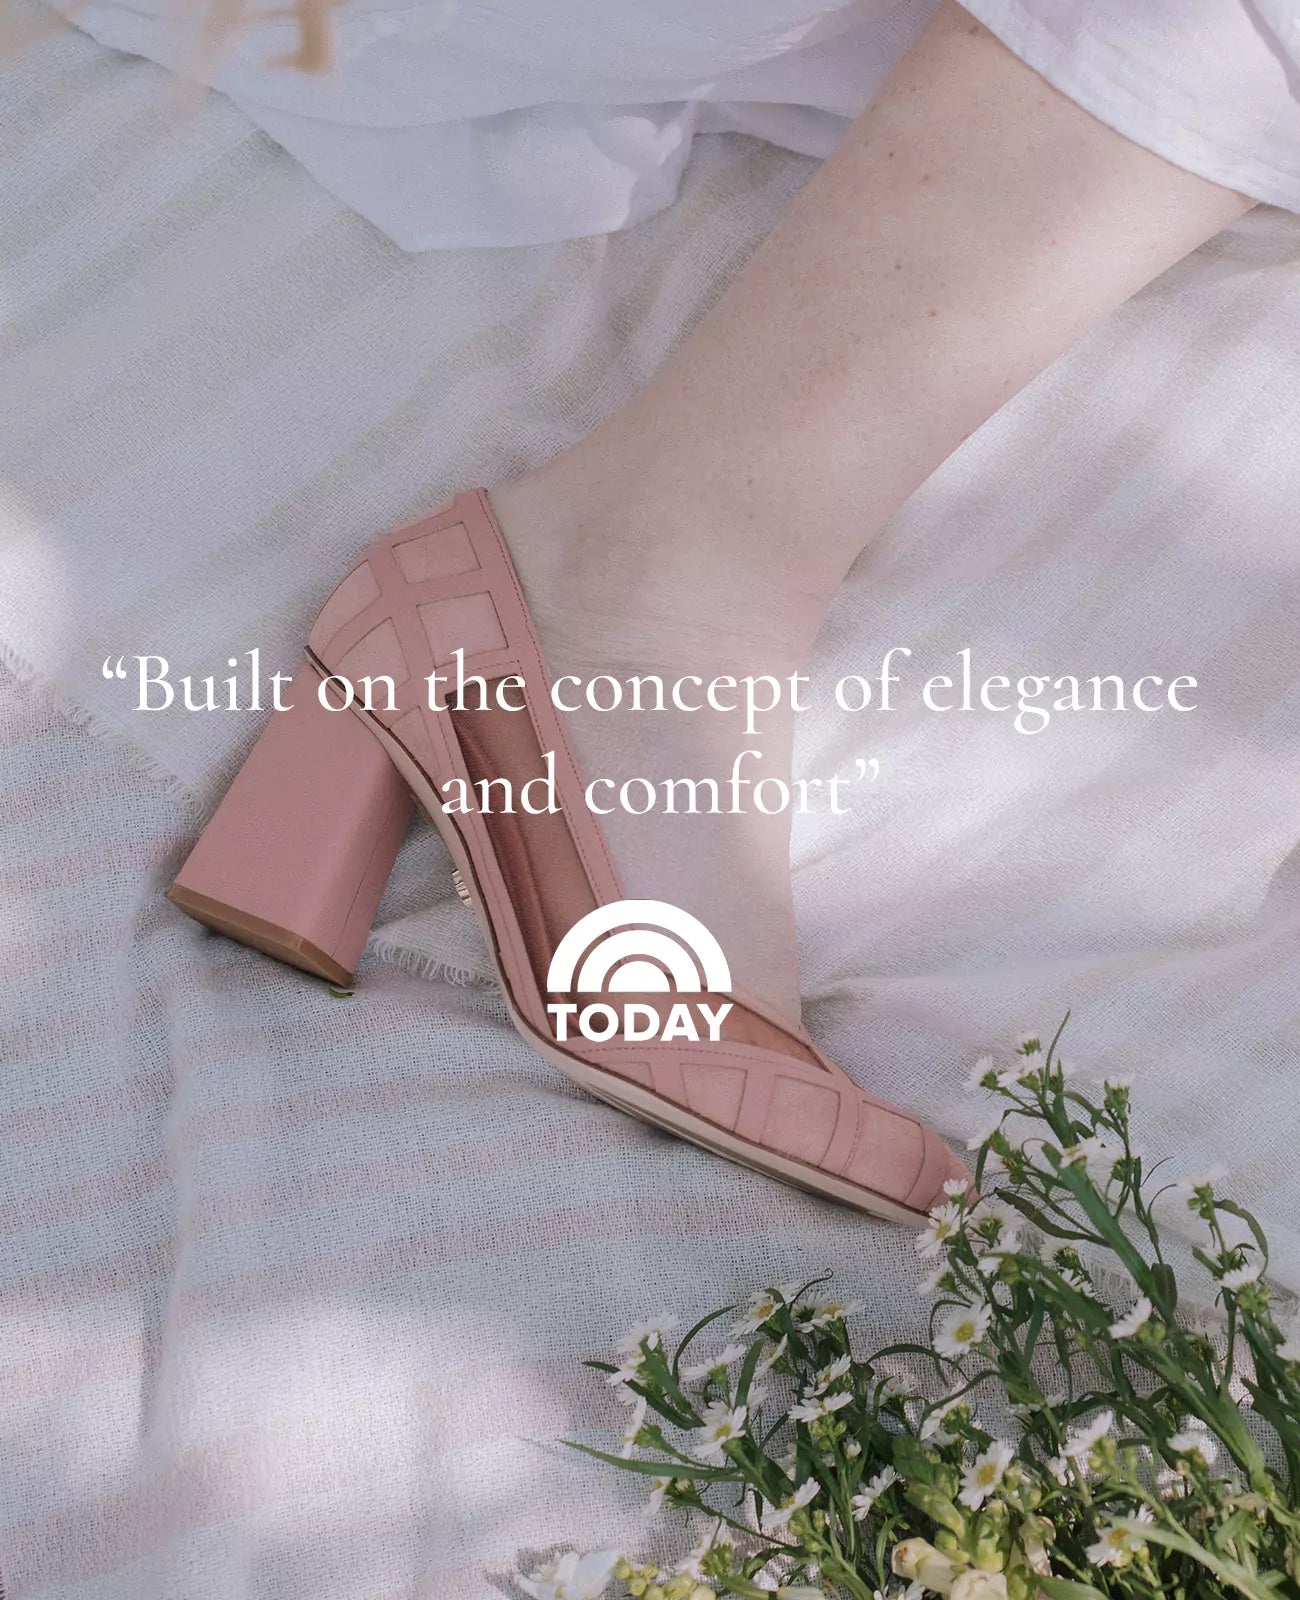 Built On the Concept of Elegance and Comfort | Today